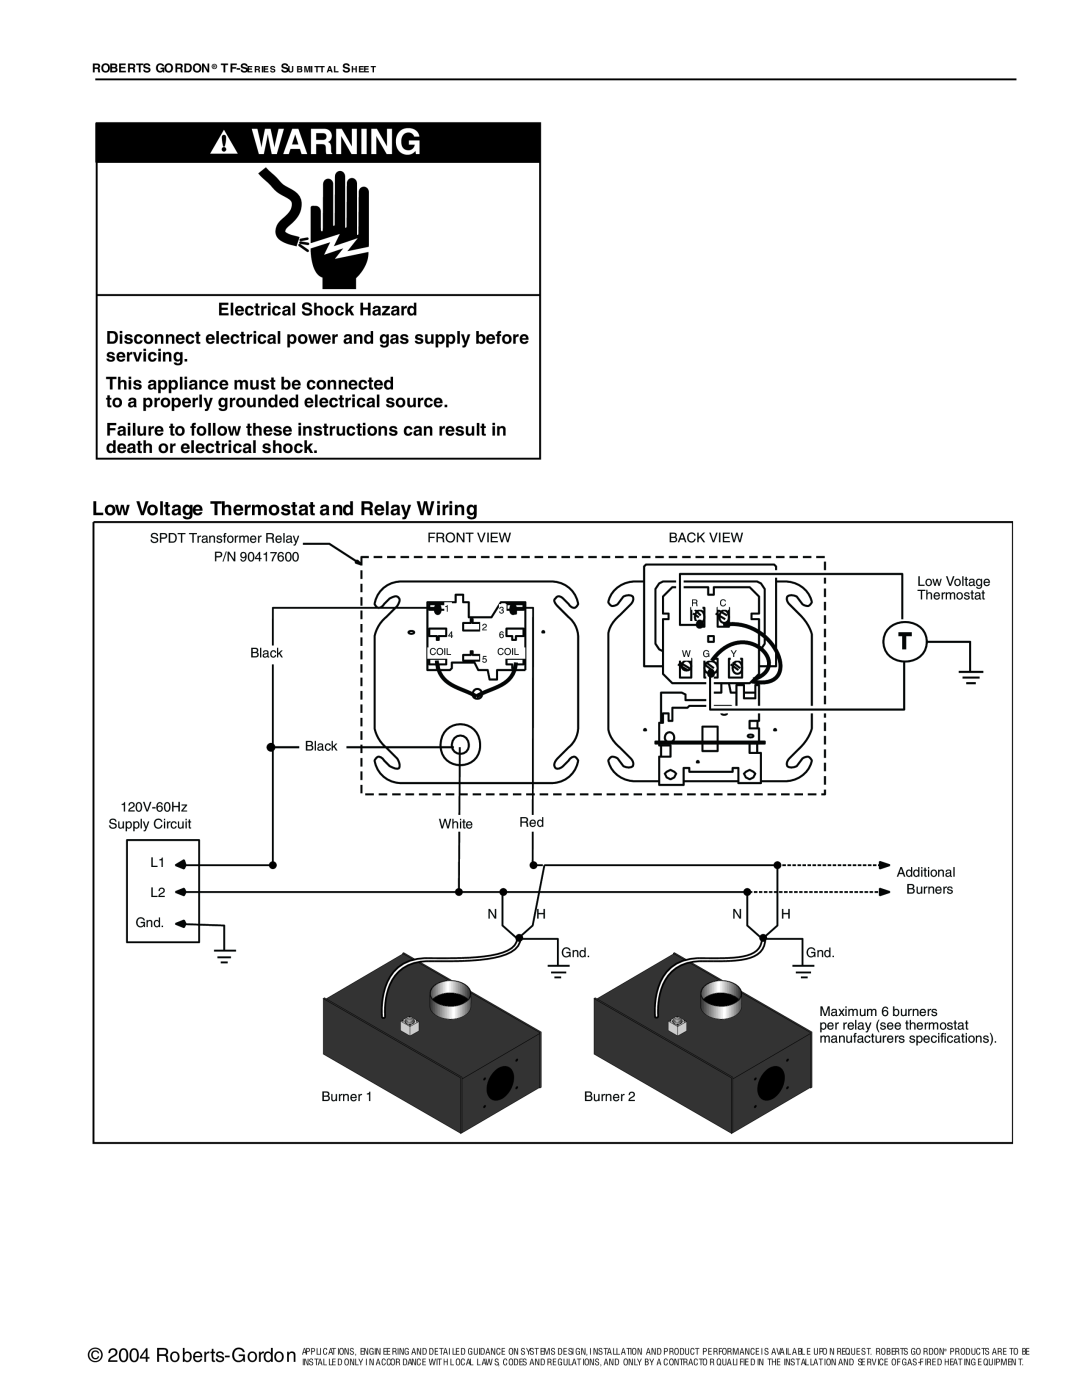 Roberts Gorden TF-Series service manual Low Voltage Thermostat and Relay Wiring, Electrical Shock Hazard 